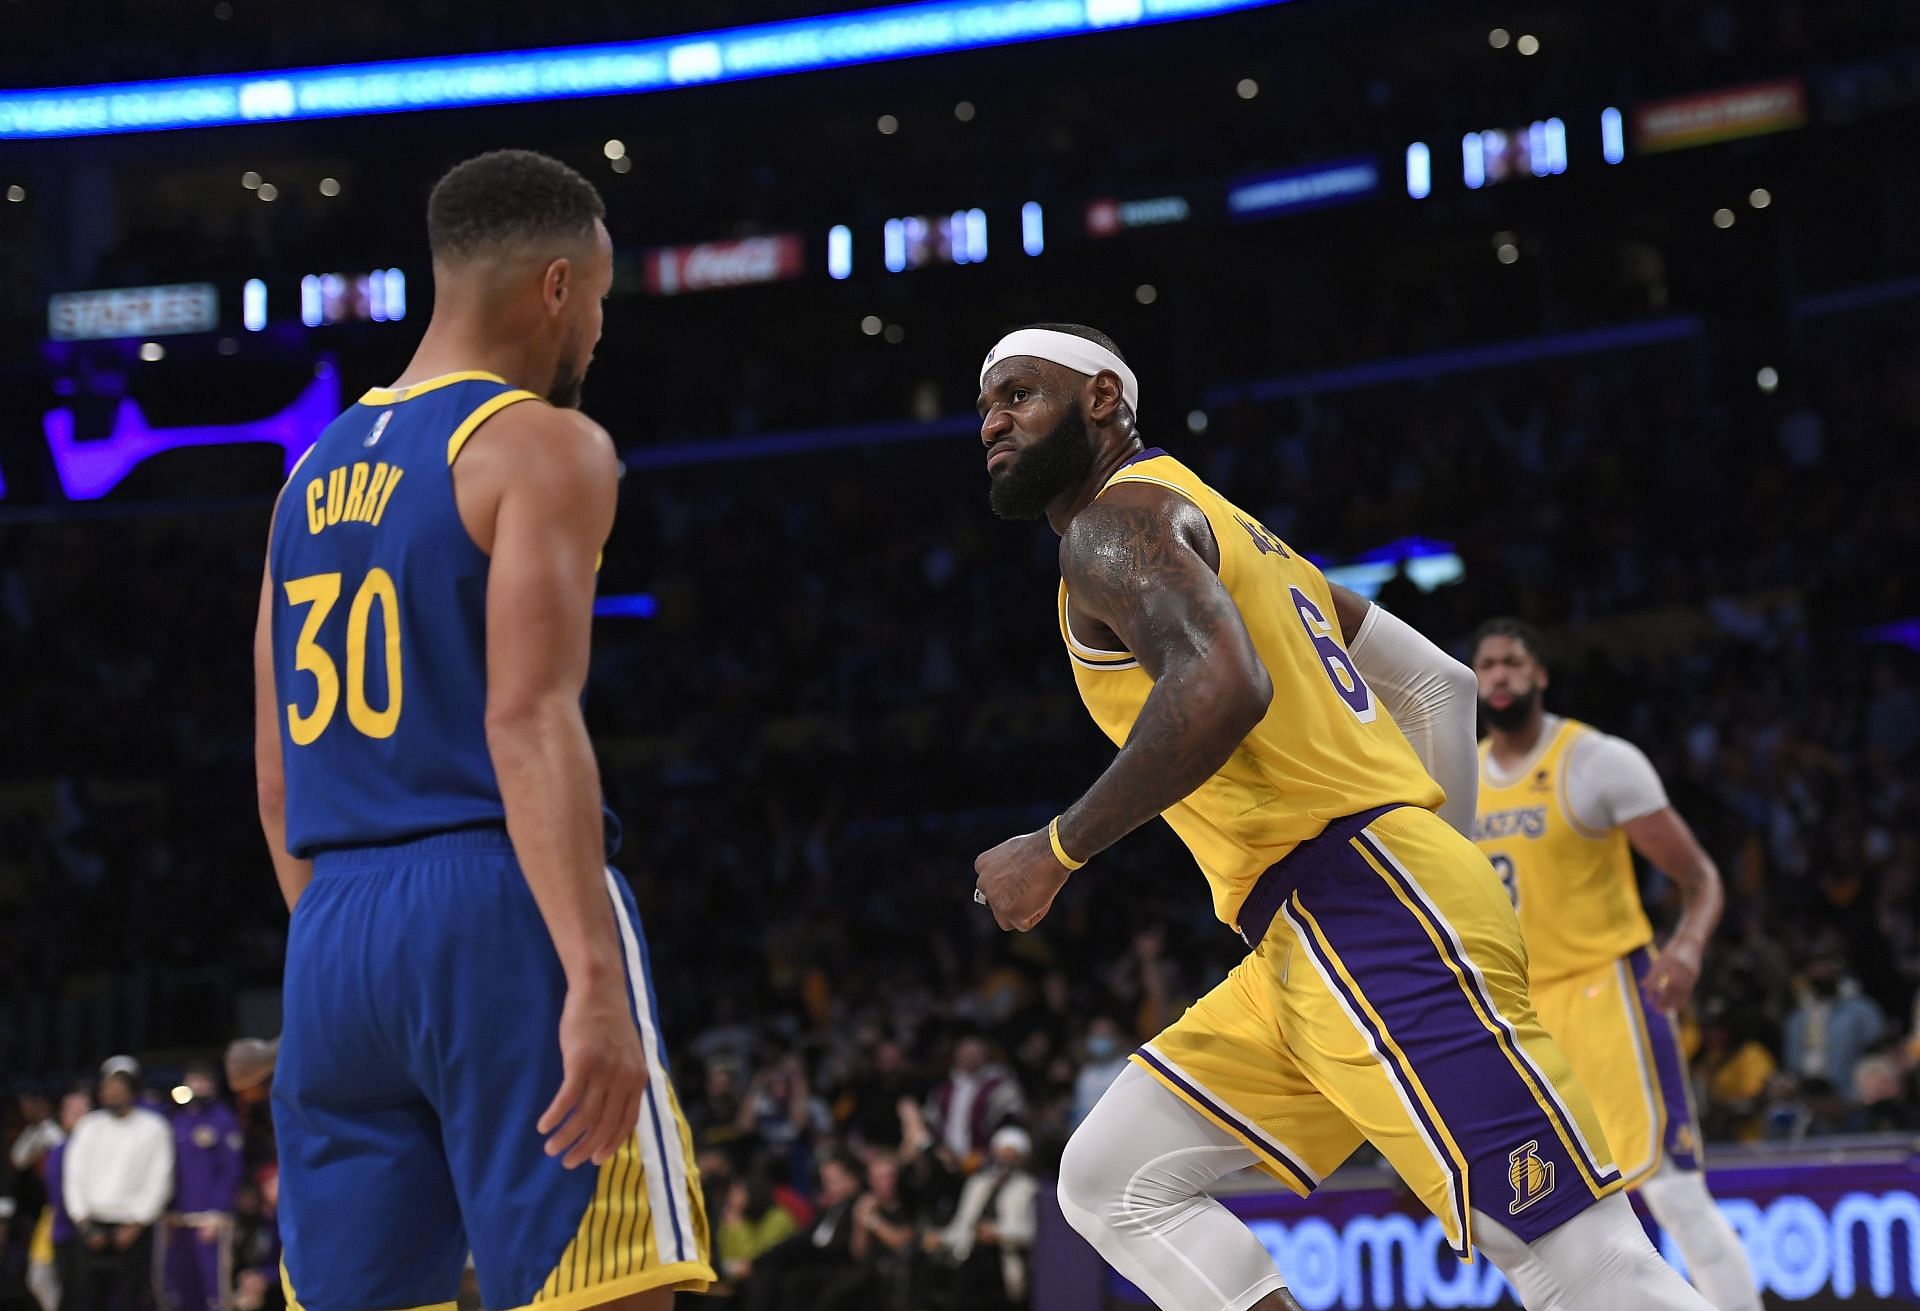 Steph Curry oif the Golden State Warriors and LeBron James of the LA Lakers.